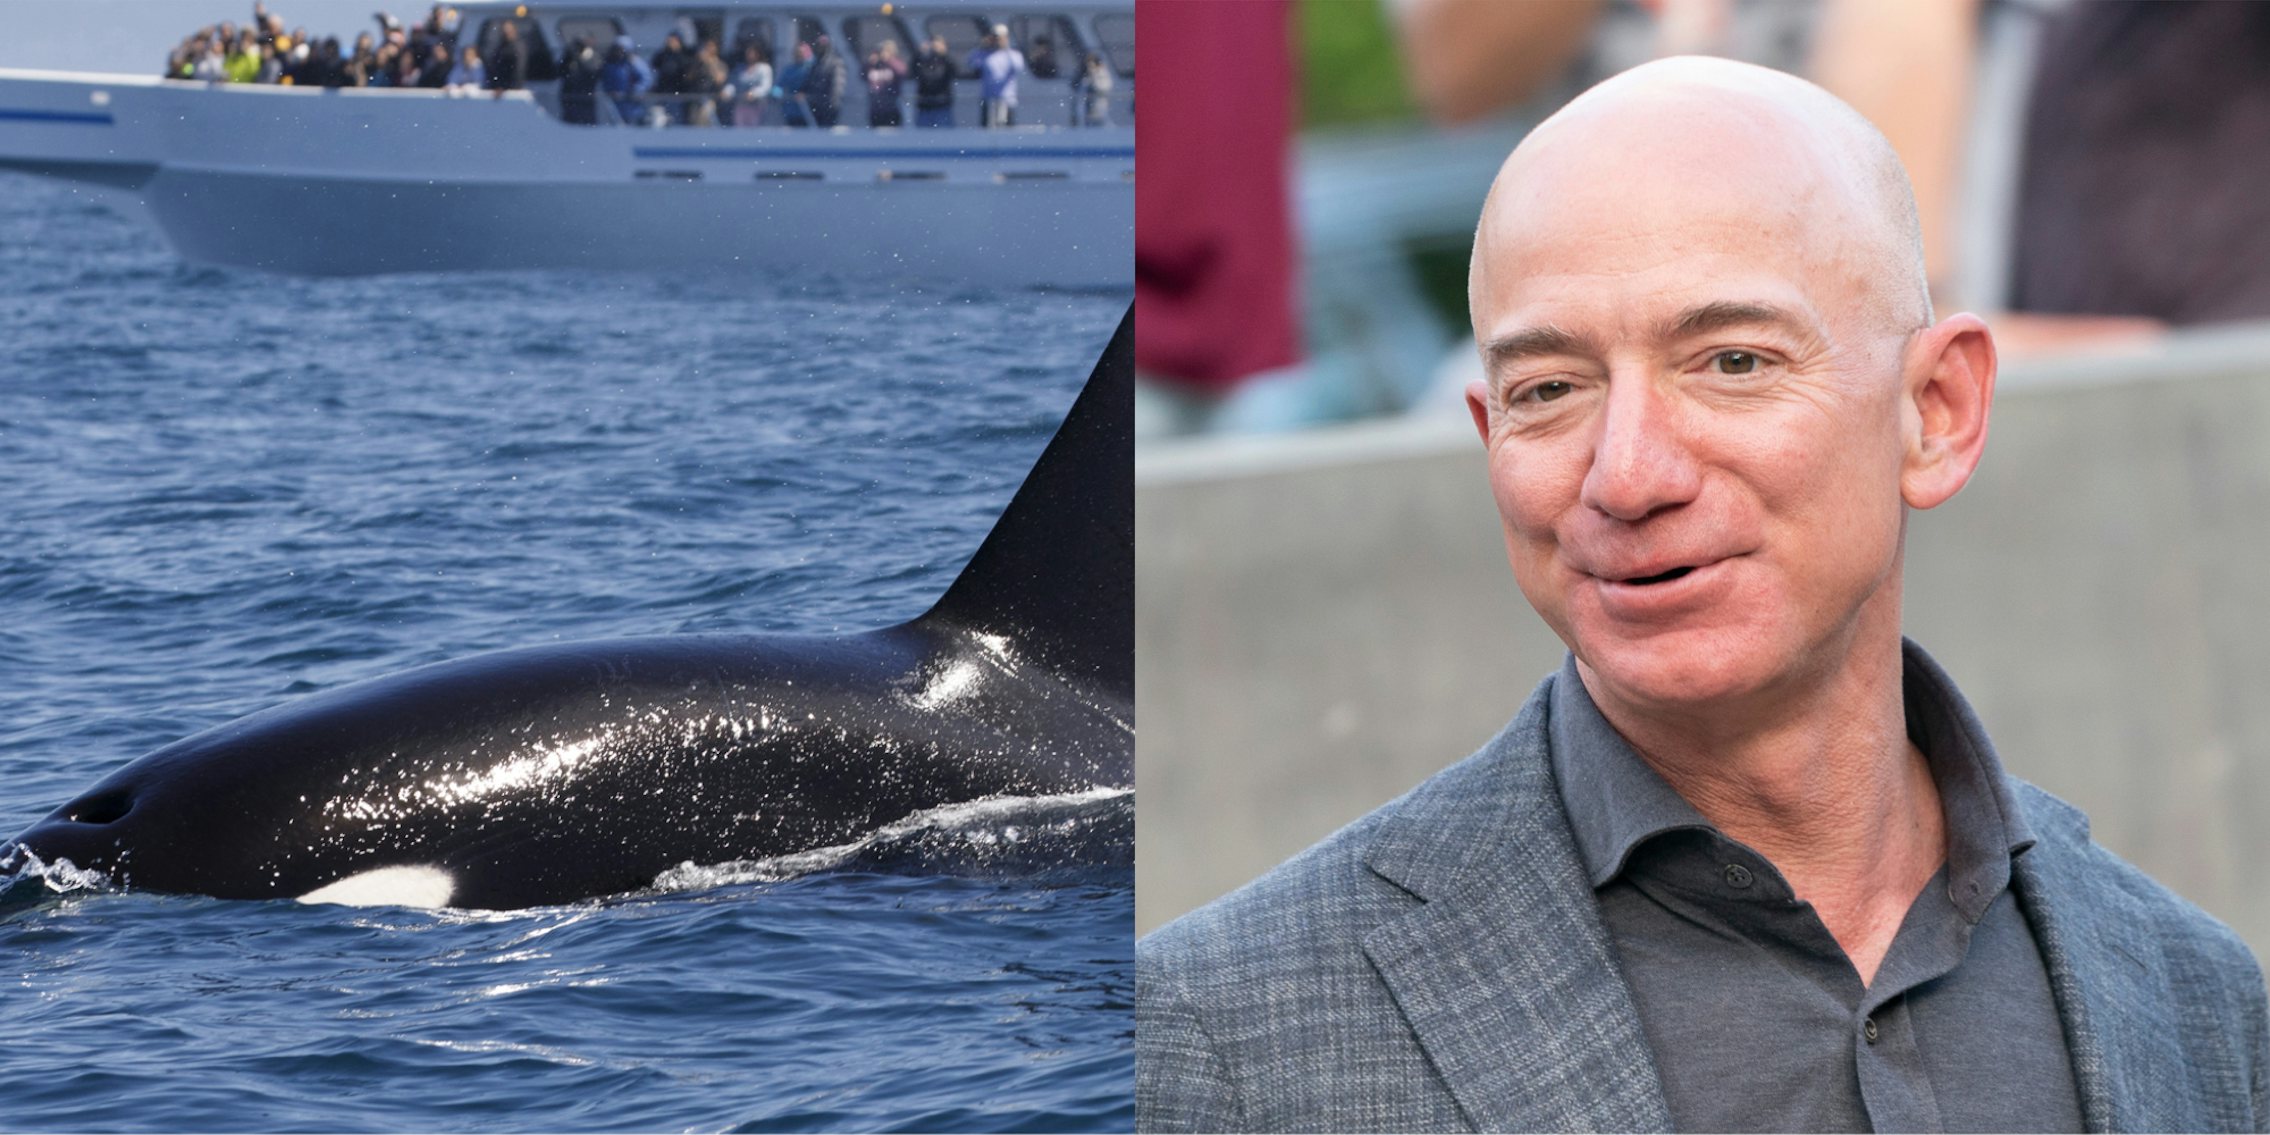 Orca in water near boat (l) Jeff Bezos speaking in front of blurry background (r)